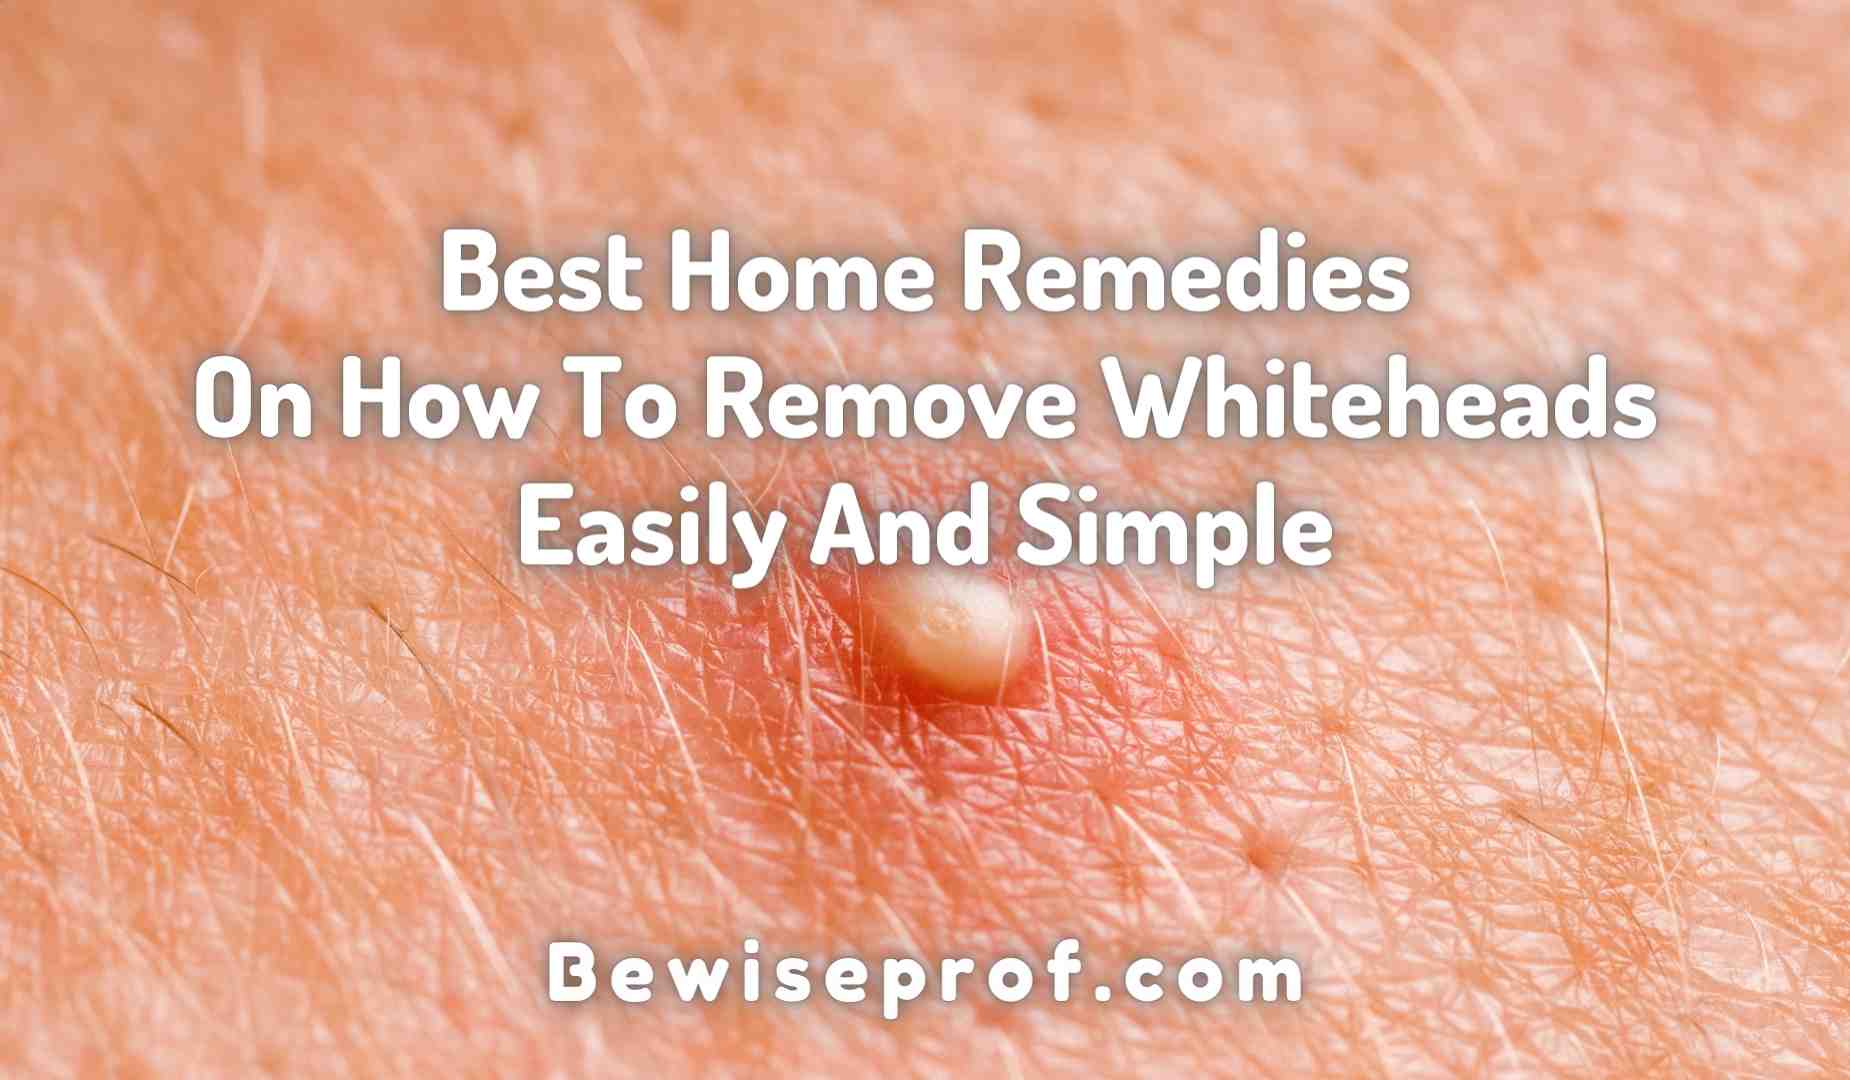 Best Home Remedies On How To Remove Whiteheads Easily And Simple